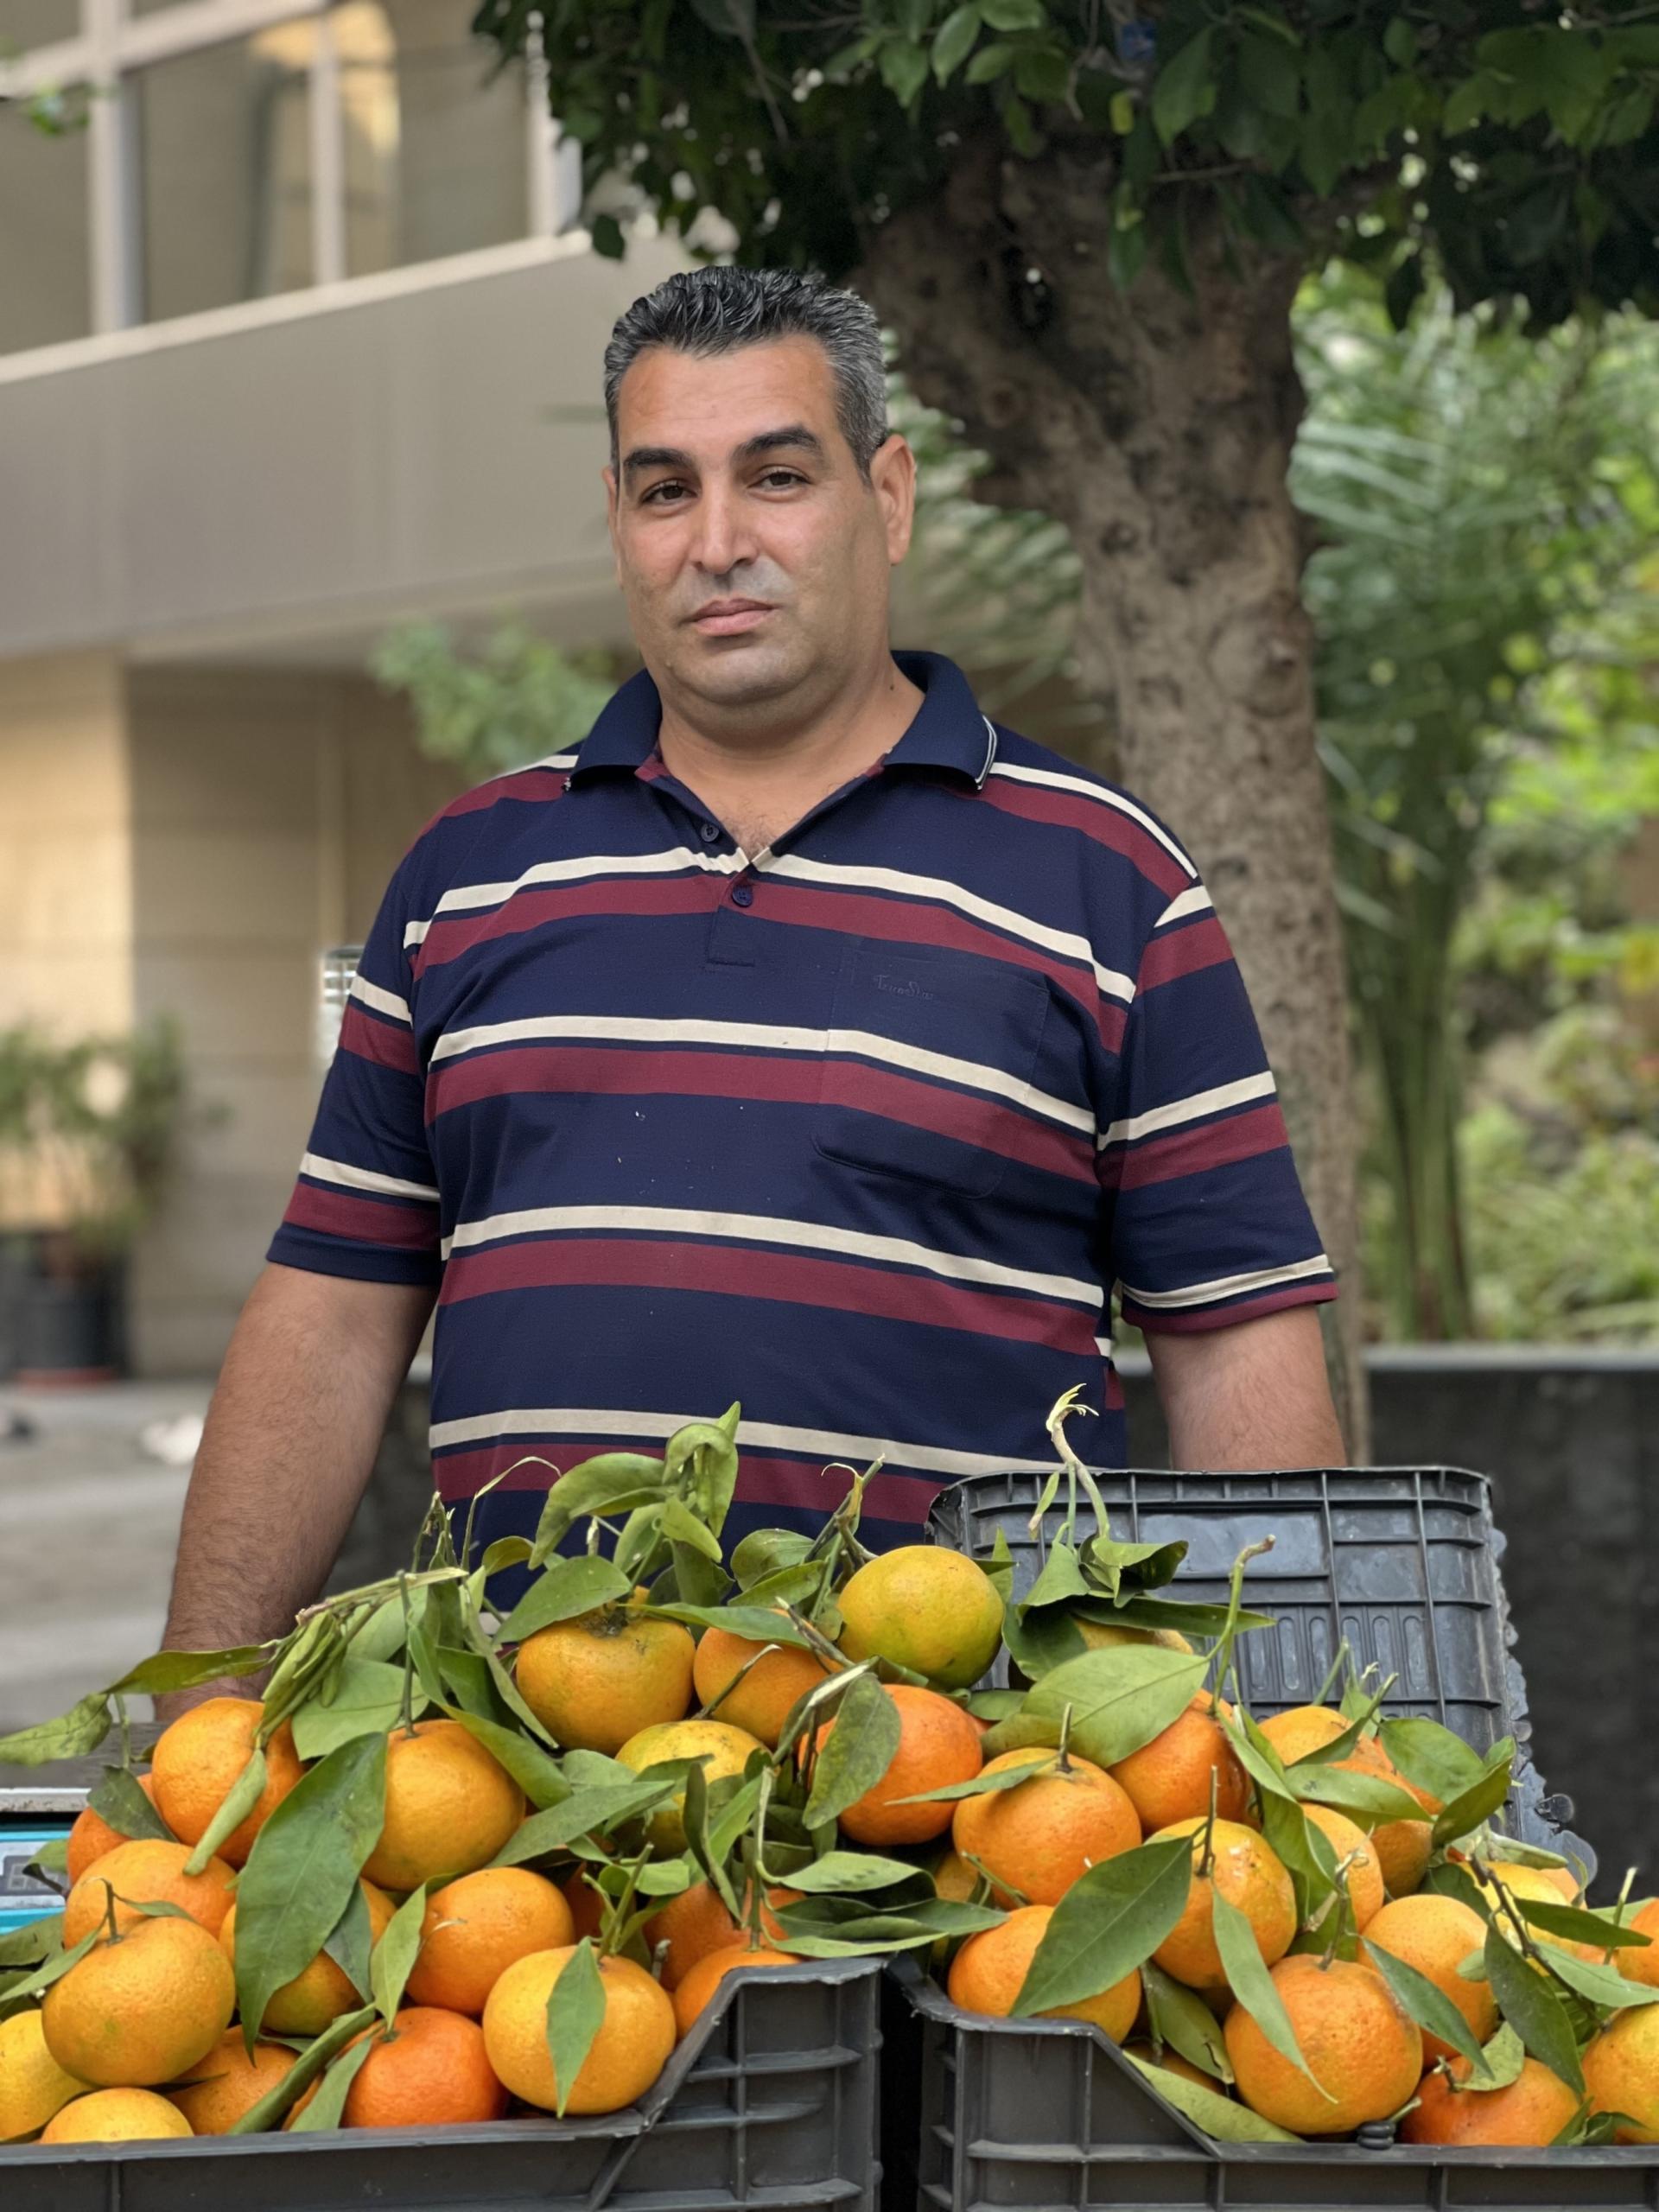 Forty-two-year-old Adnan Ziwani has been selling fruits on carts in Beirut for the past two decades. Just three months ago, he sold about 220 pounds of grapes a day. Today, he says, he’s lucky if he sells 77 pounds.